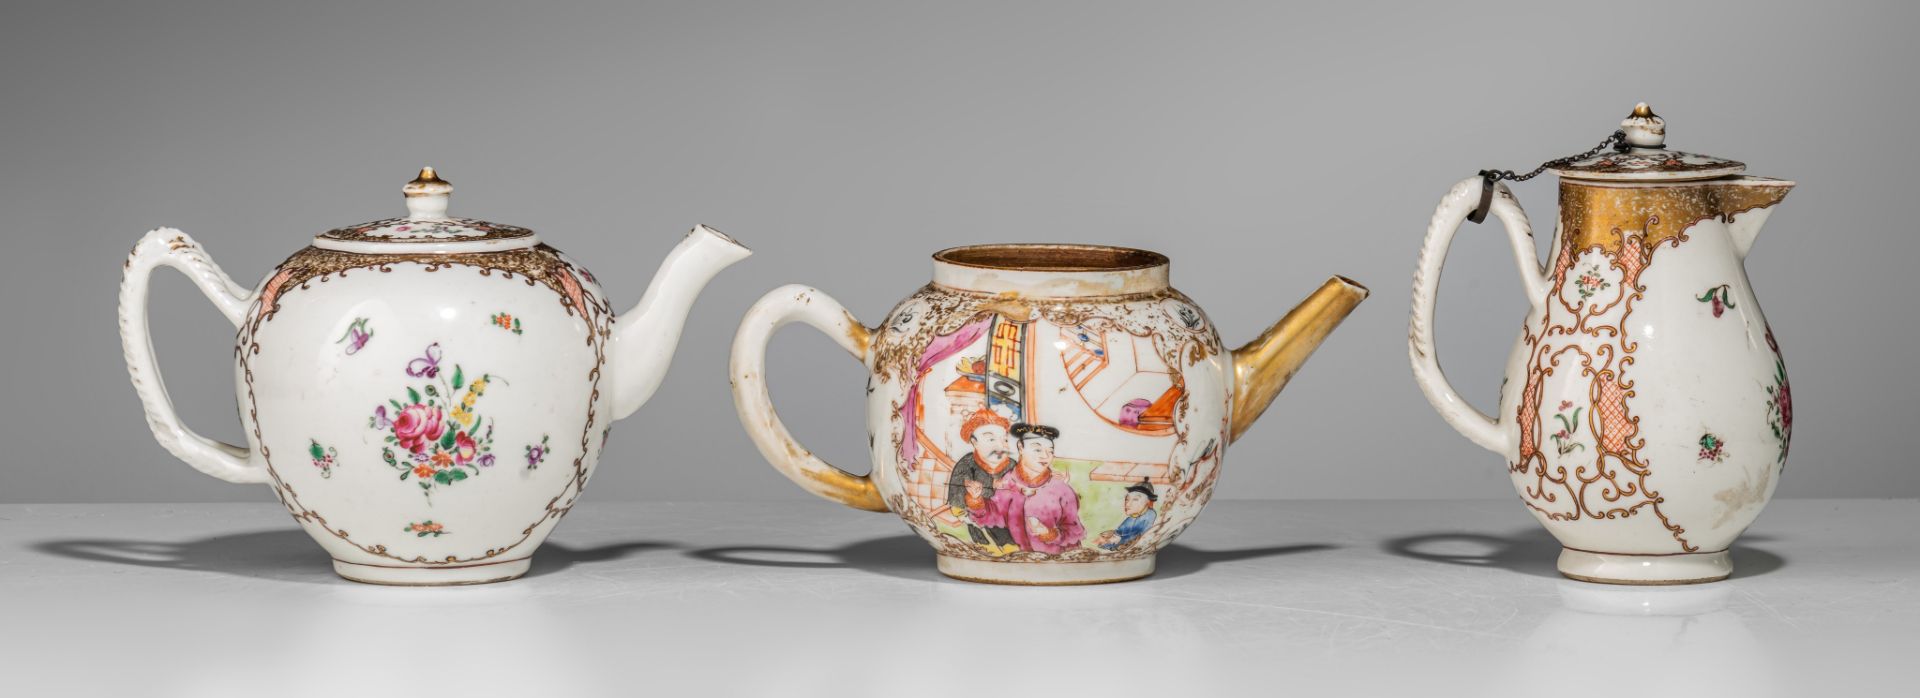 A collection of famille rose and gilt decorated export porcelain ware, 18thC, largest - H 12,5 - 34, - Image 2 of 20